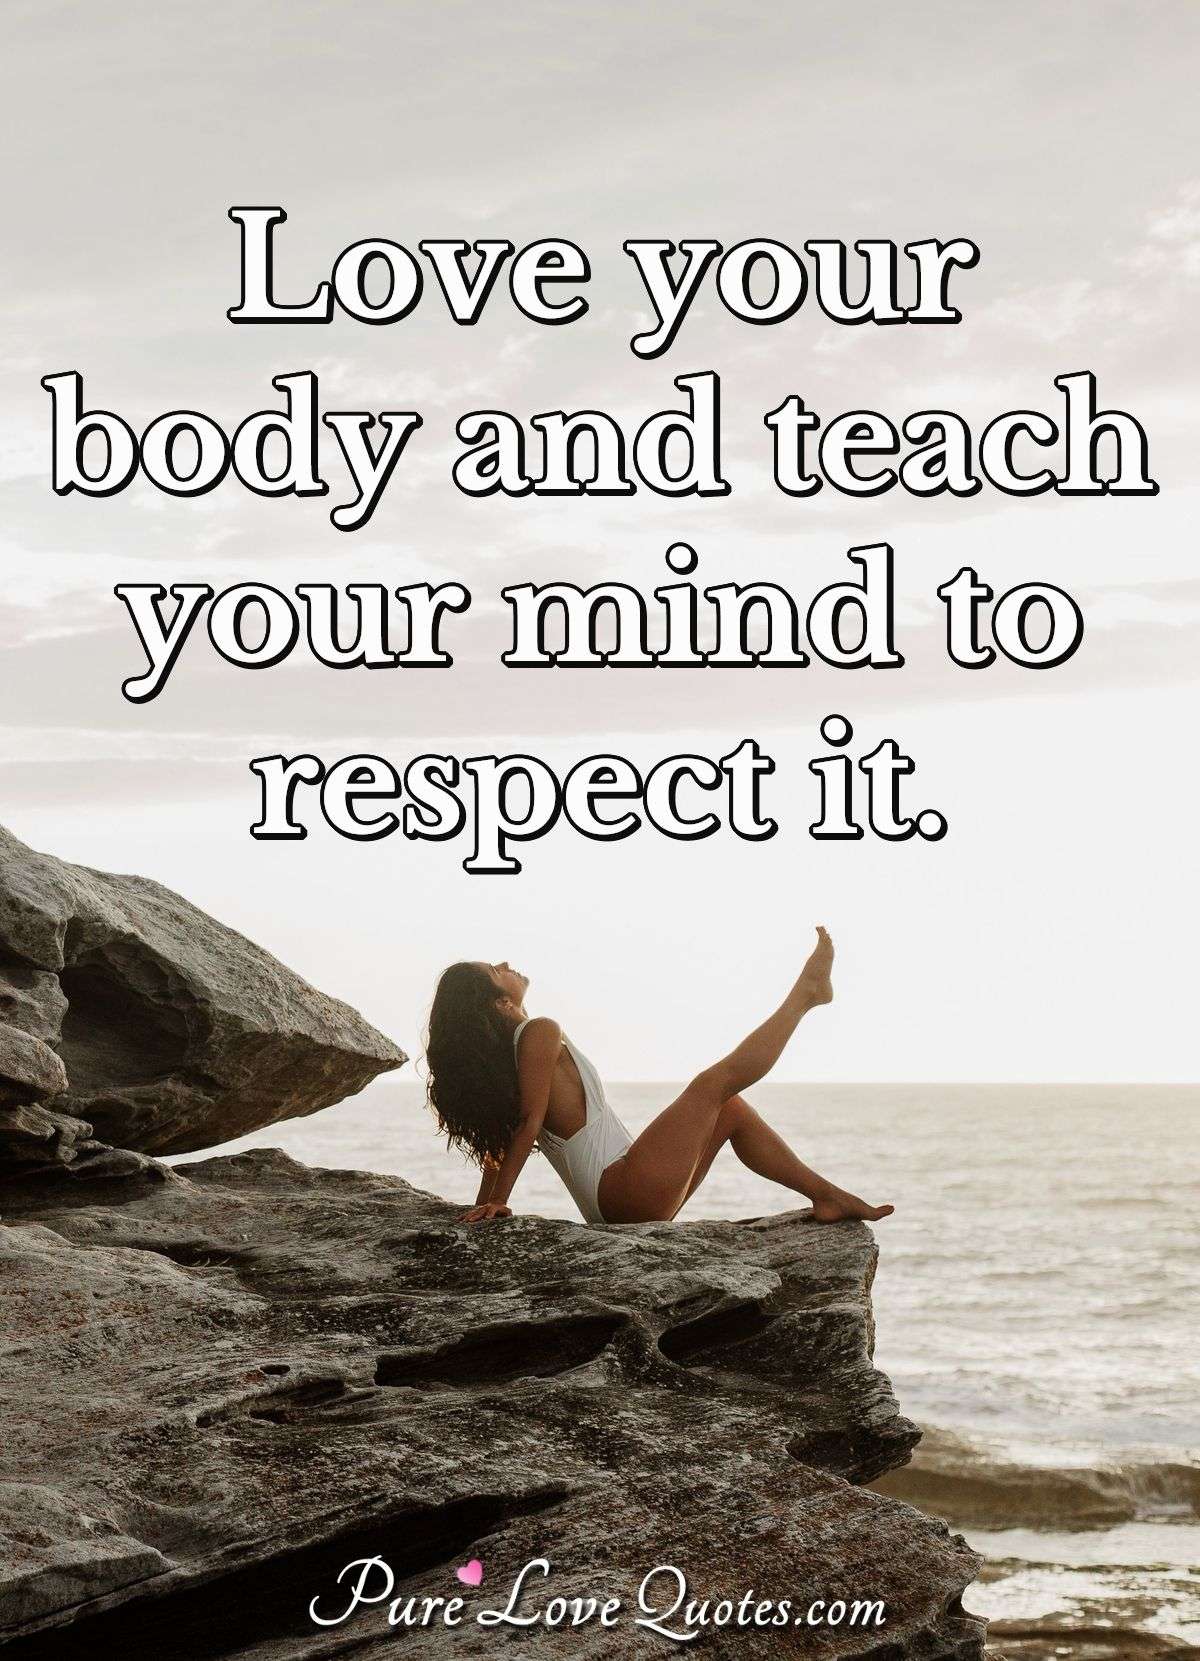 Love your body and teach your mind to respect it. - Anonymous